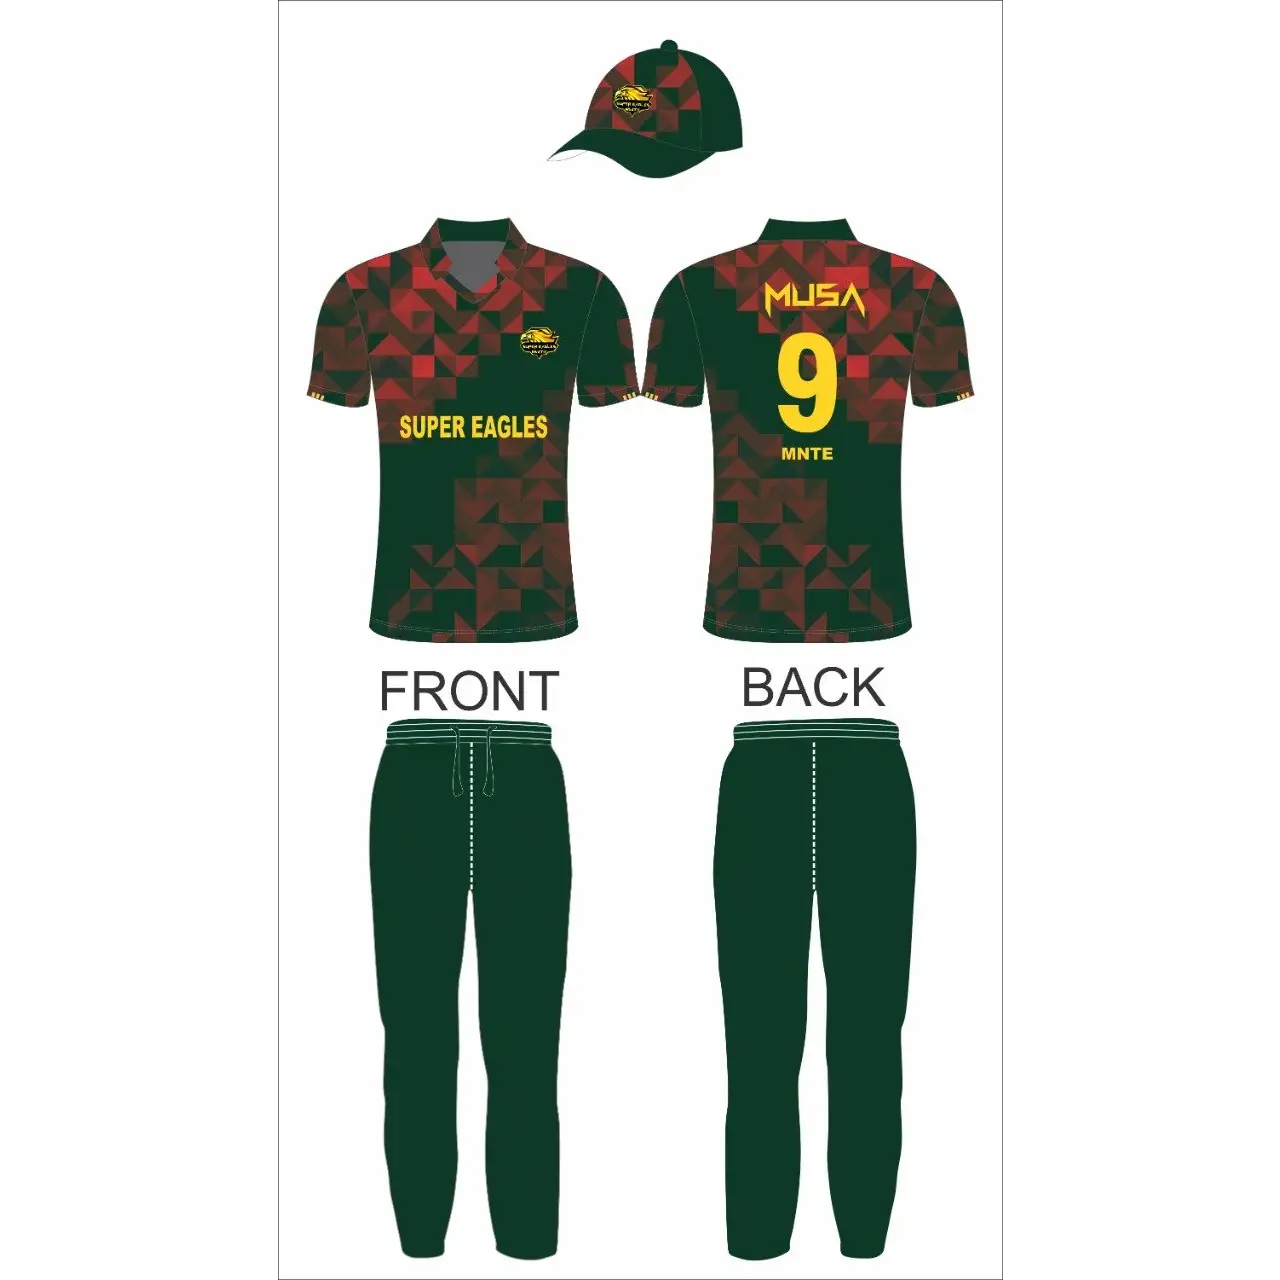 Cricket Uniform Kit Red Green Yellow Jersey Trouser Hat Sublimation - Chat/Call/email for price - CLOTHING CUSTOM